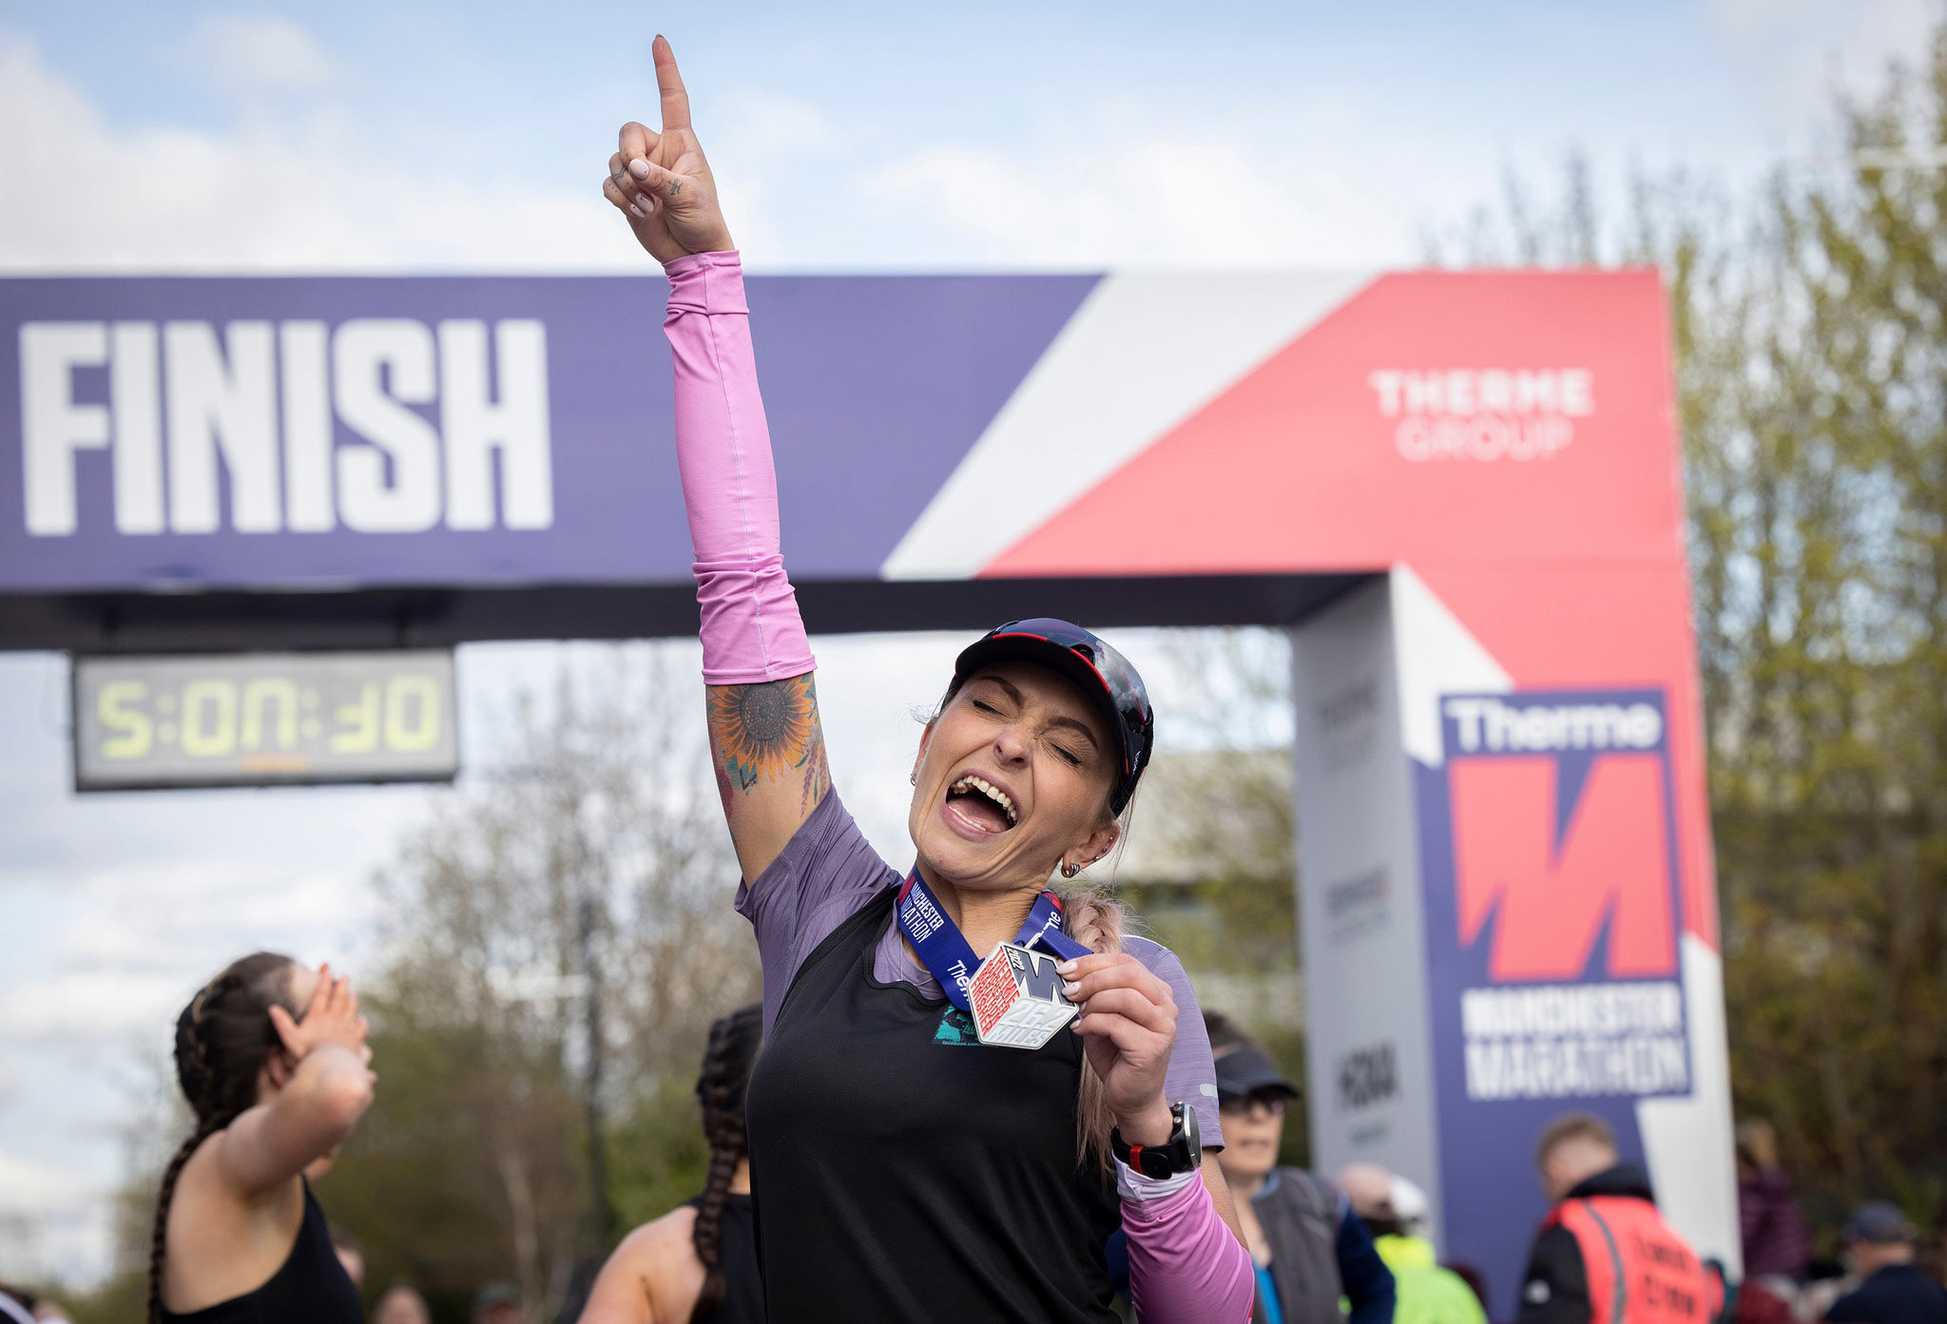 A happy participant punches the air after completing the Manchester Marathon.